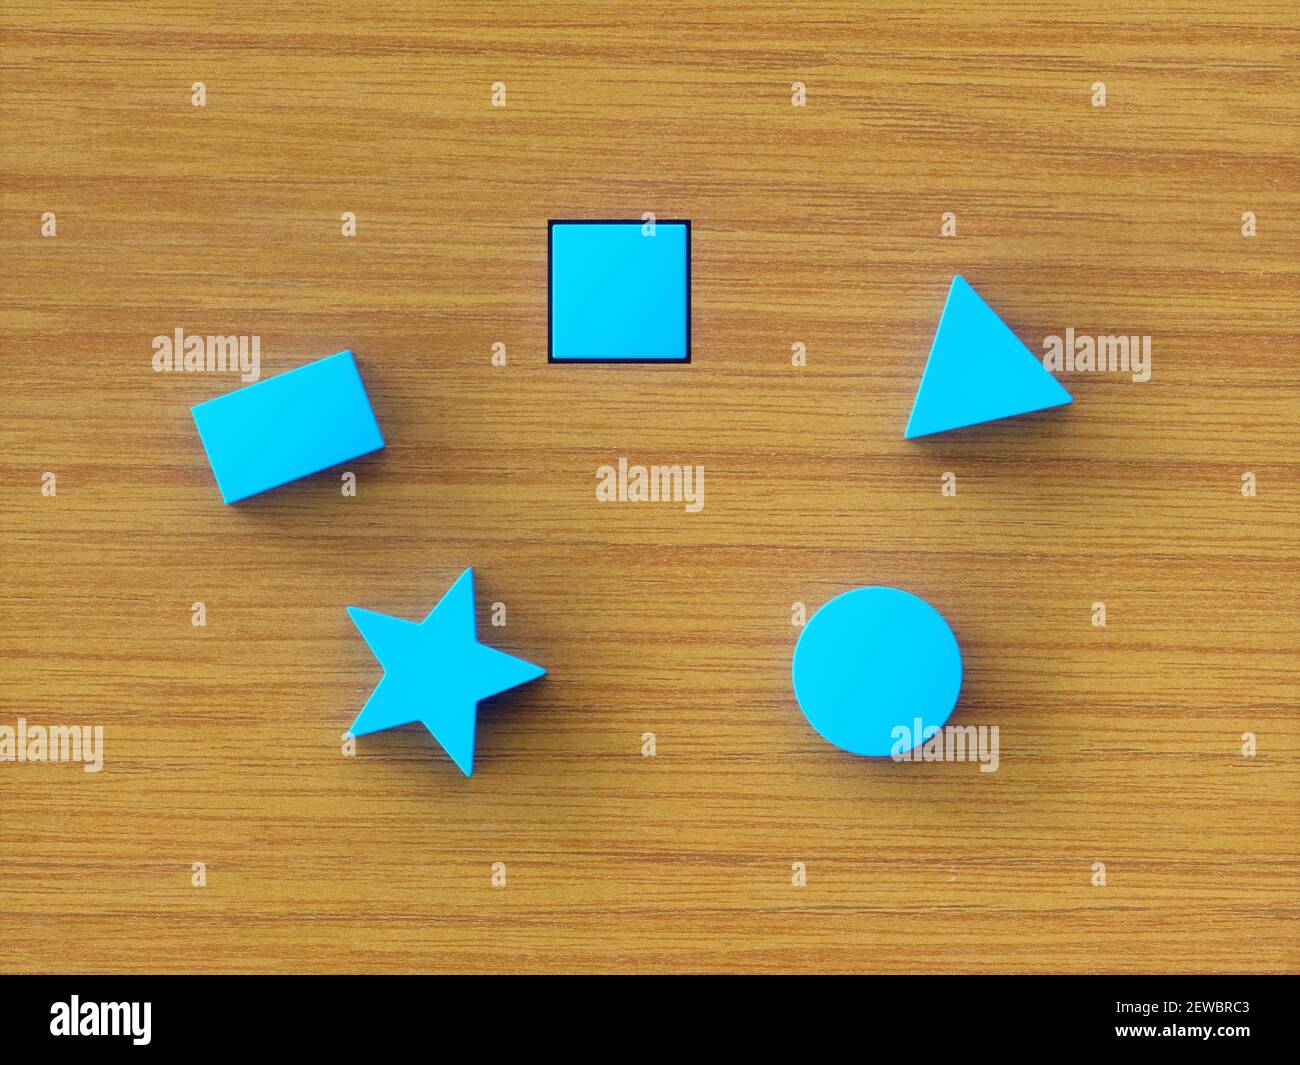 Assorted blue building blocks on wooden table. Concept image of educational toy and psychological test. Stock Photo